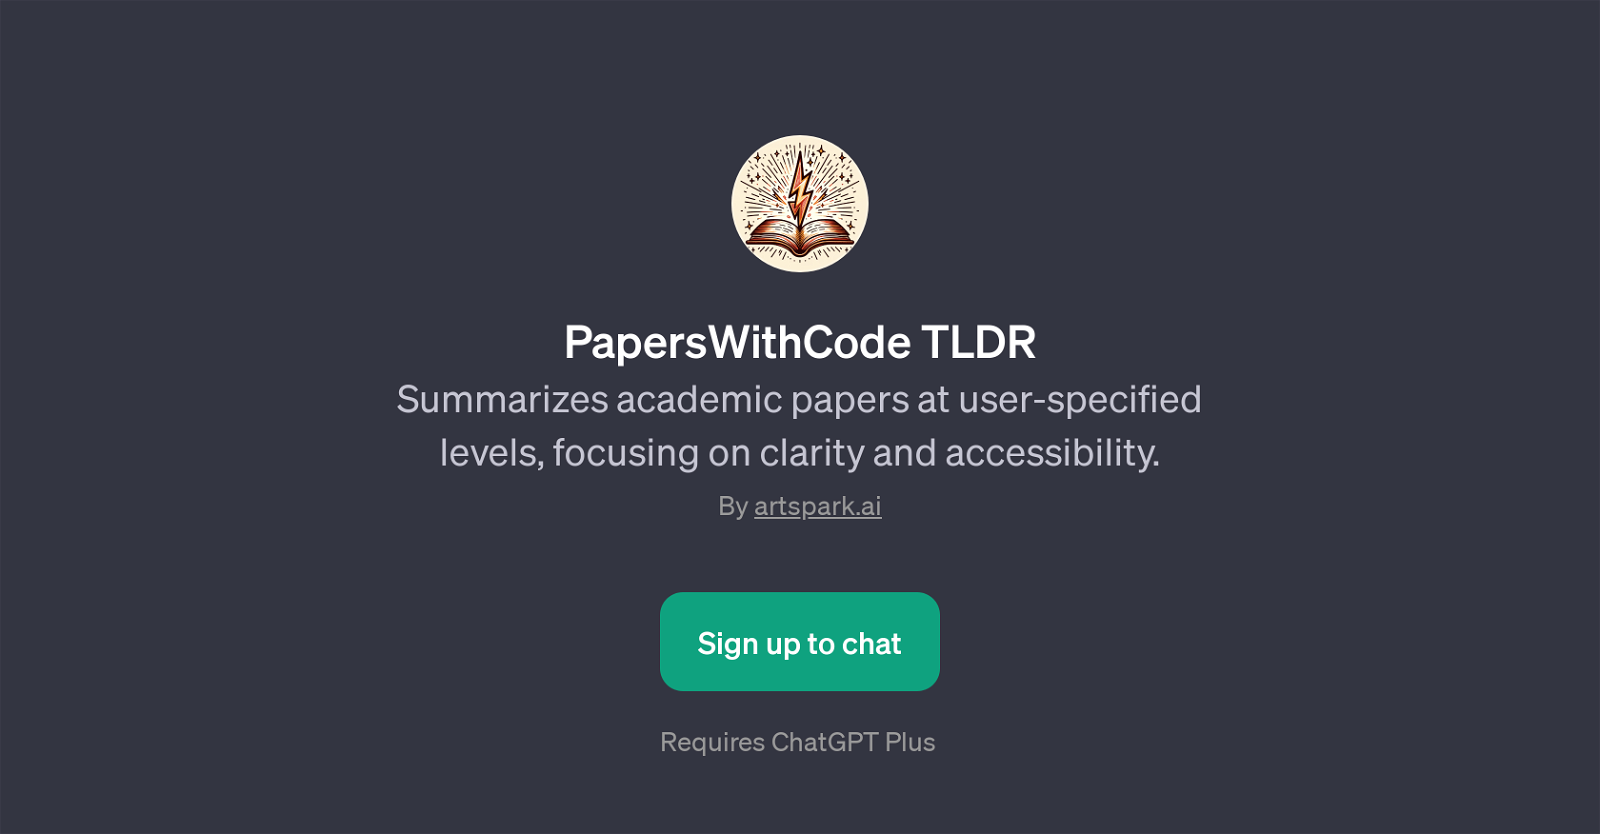 PapersWithCode TLDR website